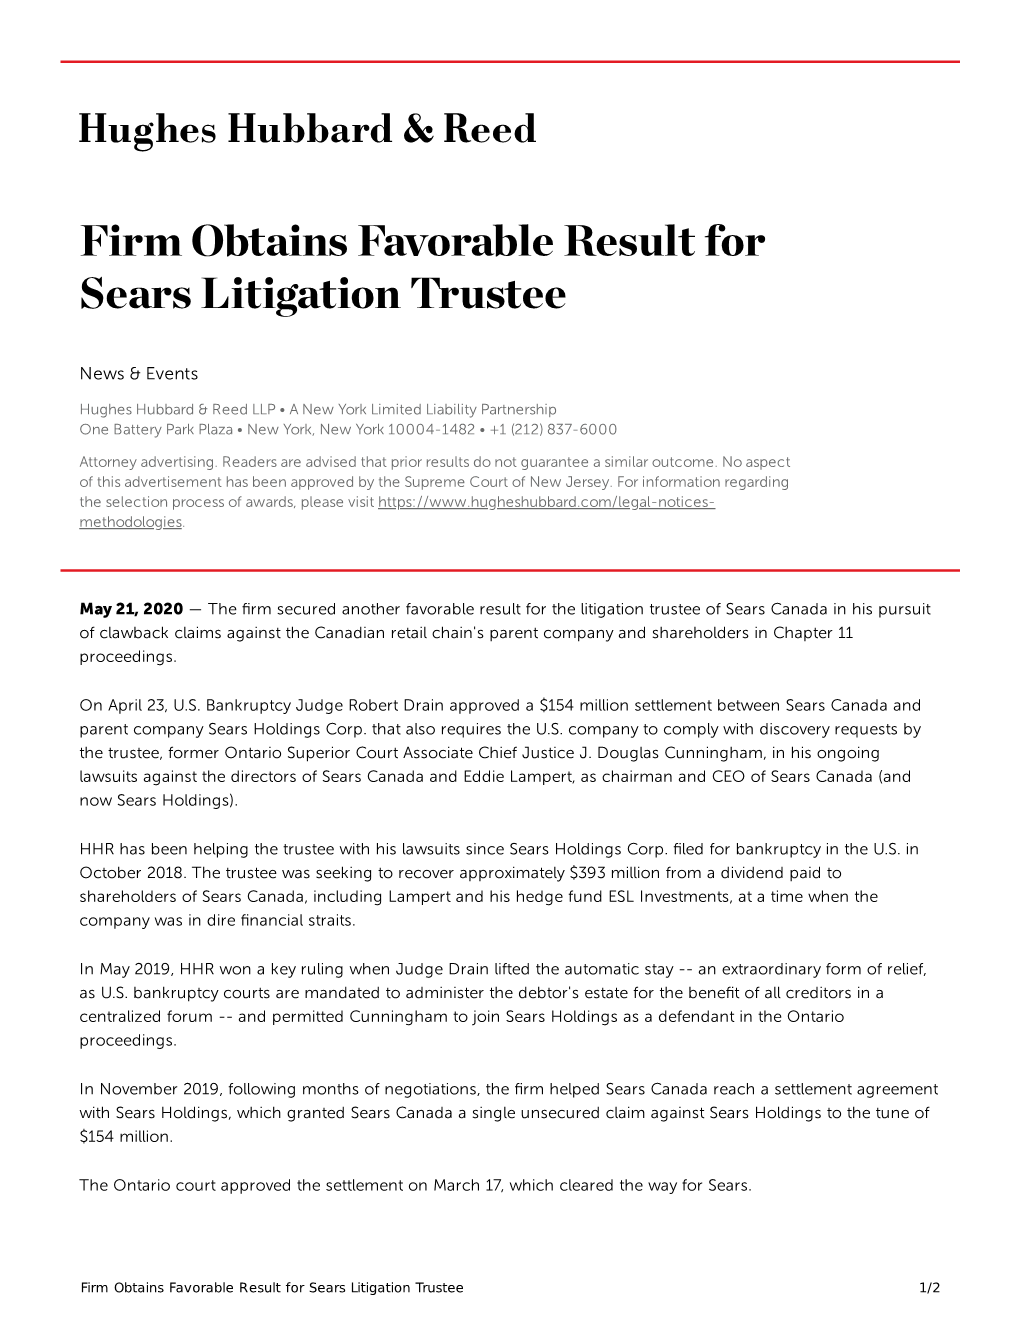 Firm Obtains Favorable Result for Sears Litigation Trustee